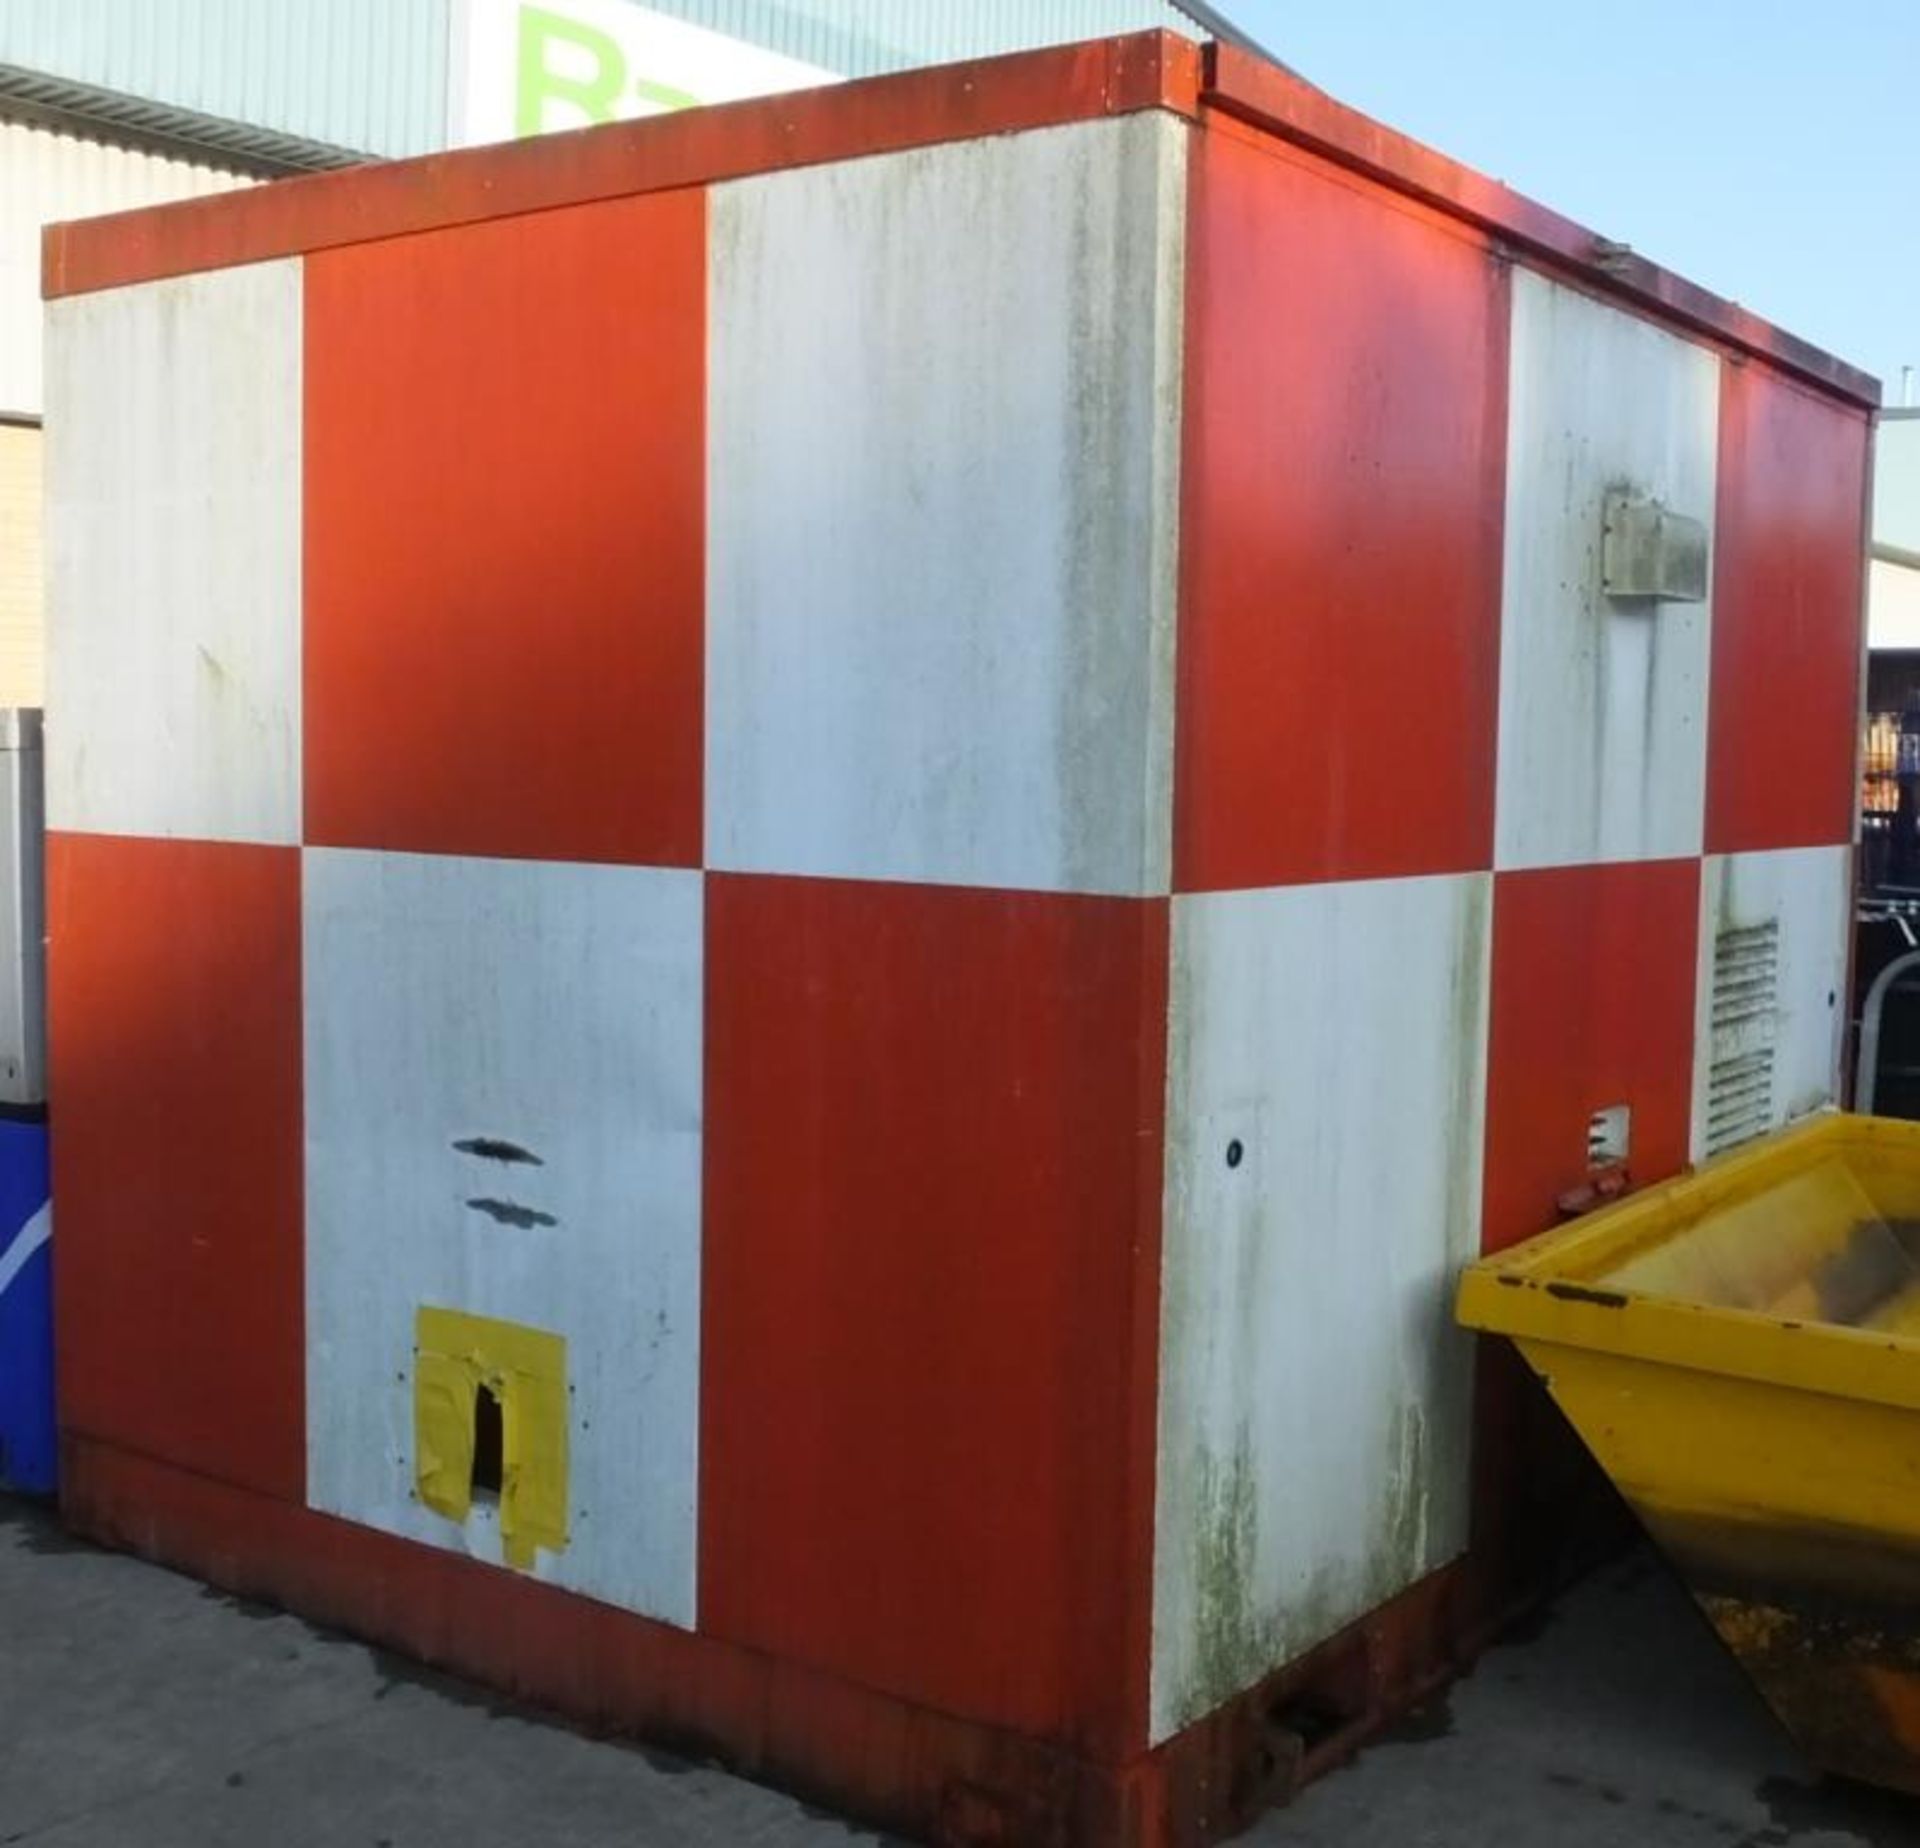 Cabin L 3.5M x W 2.5M x H 2.5M - Door off - £5+ Vat Loading Charge Applied to this Lot